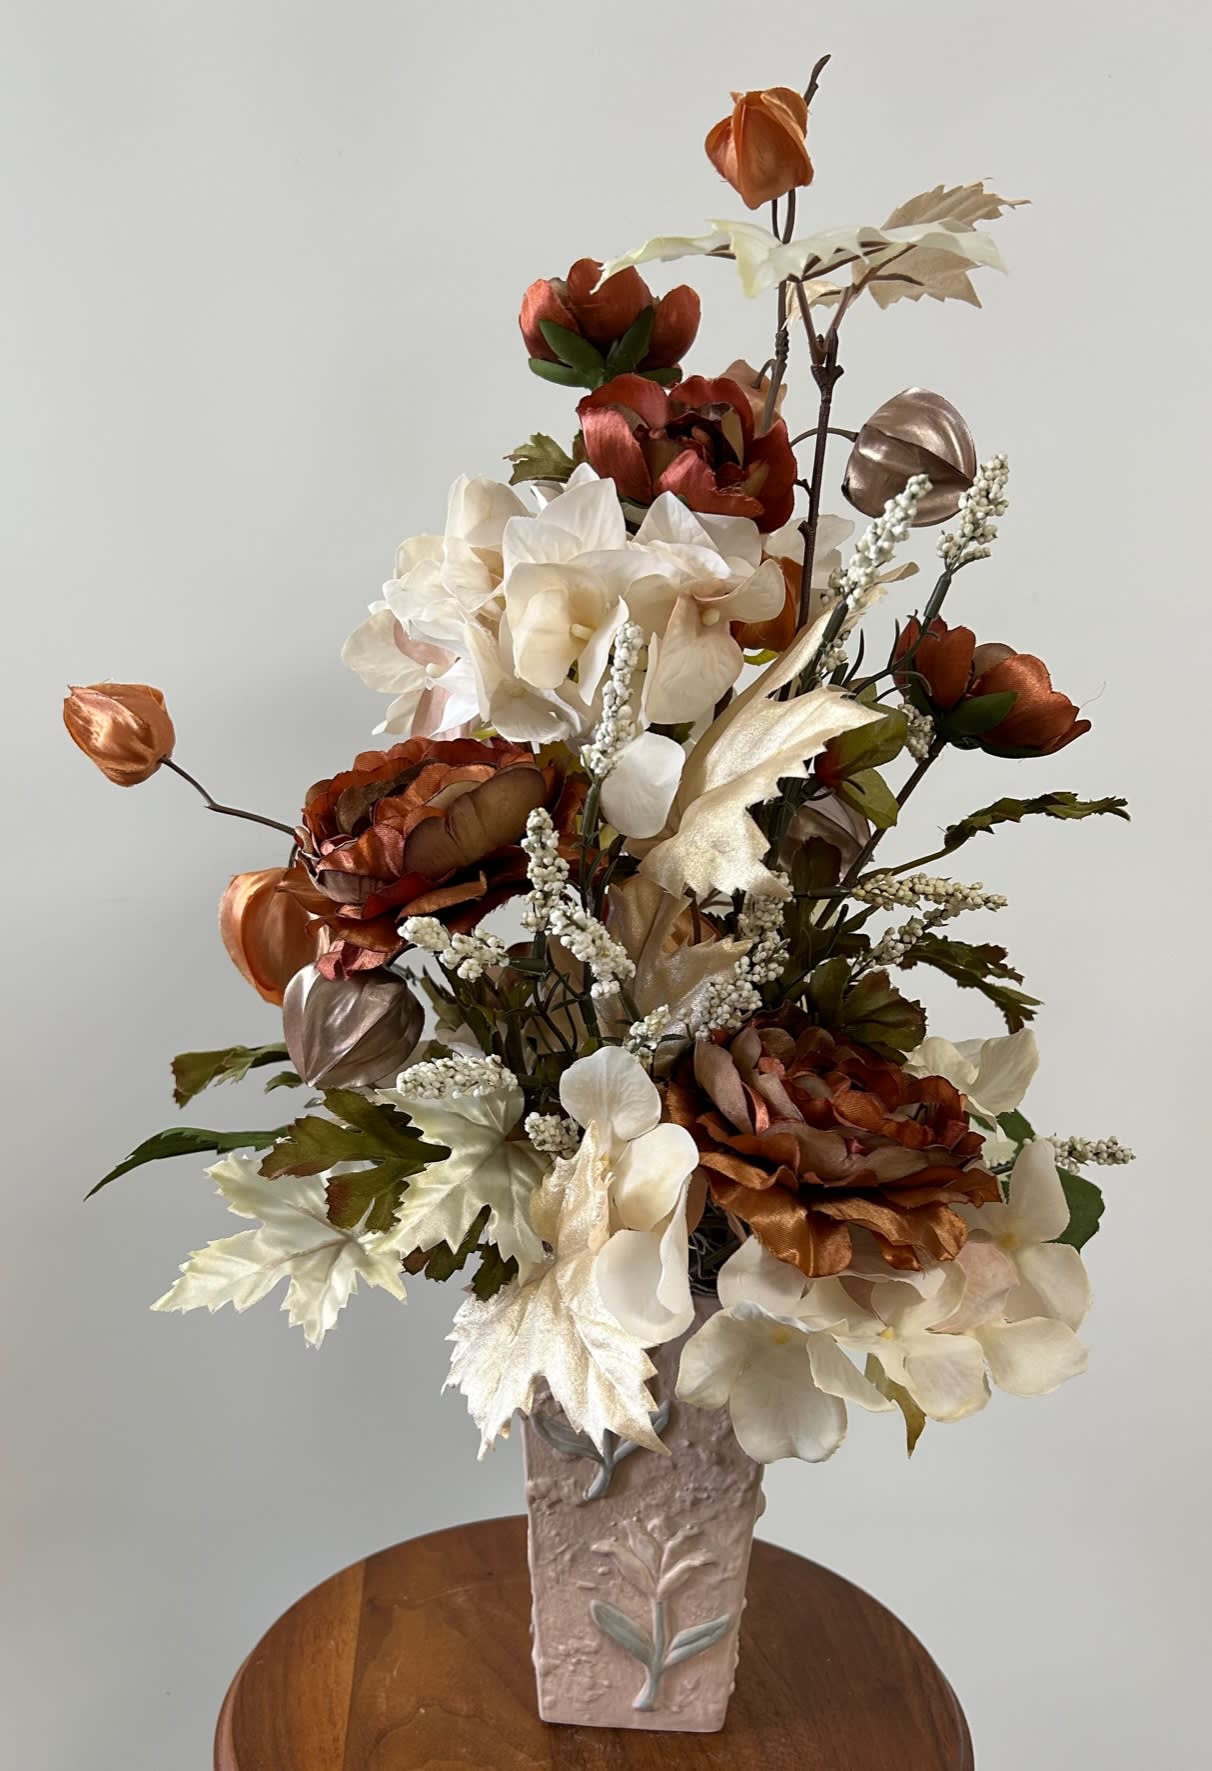 Silk and Dried Floral Arrangements Have Never Been So Easy